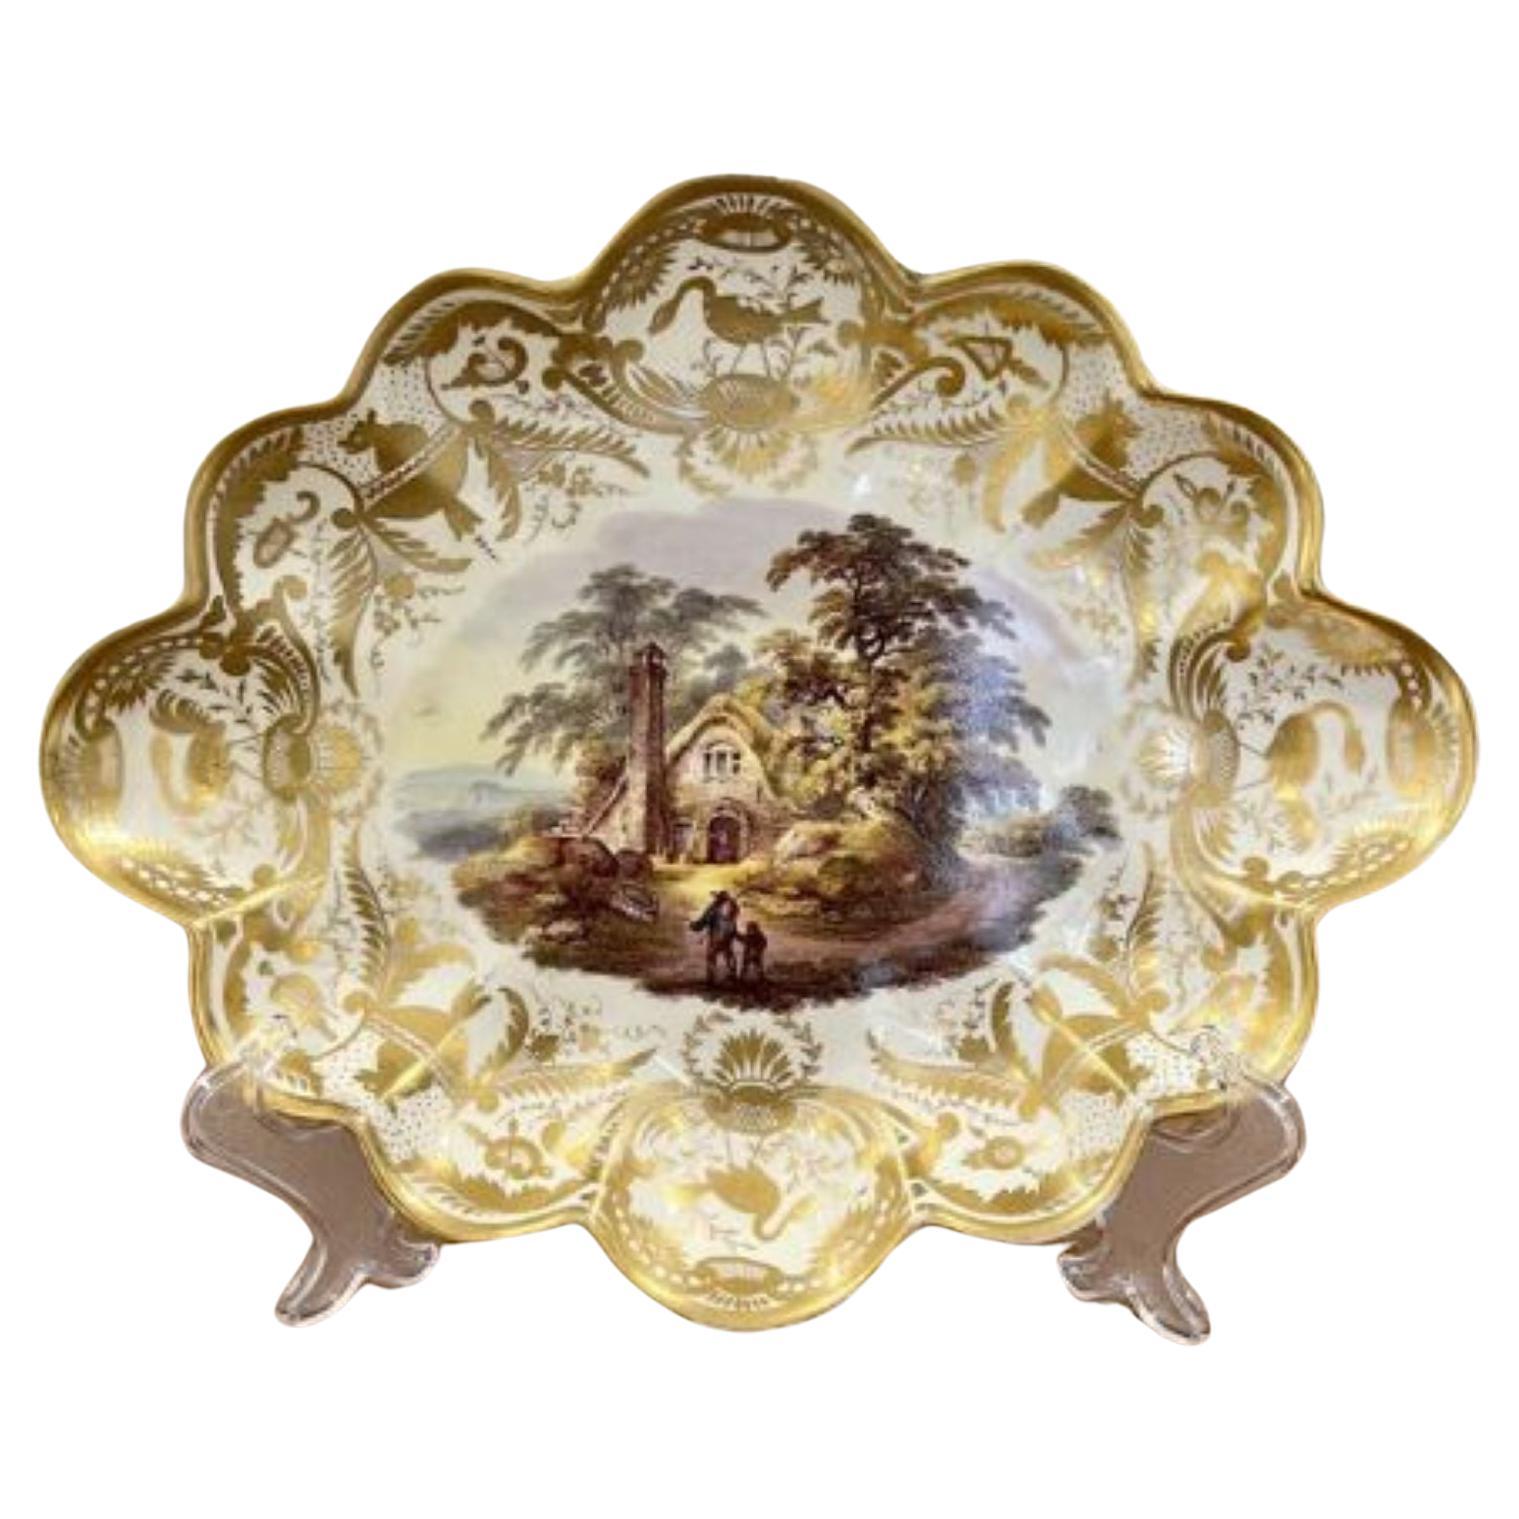 Quality antique Victorian Derby dish For Sale